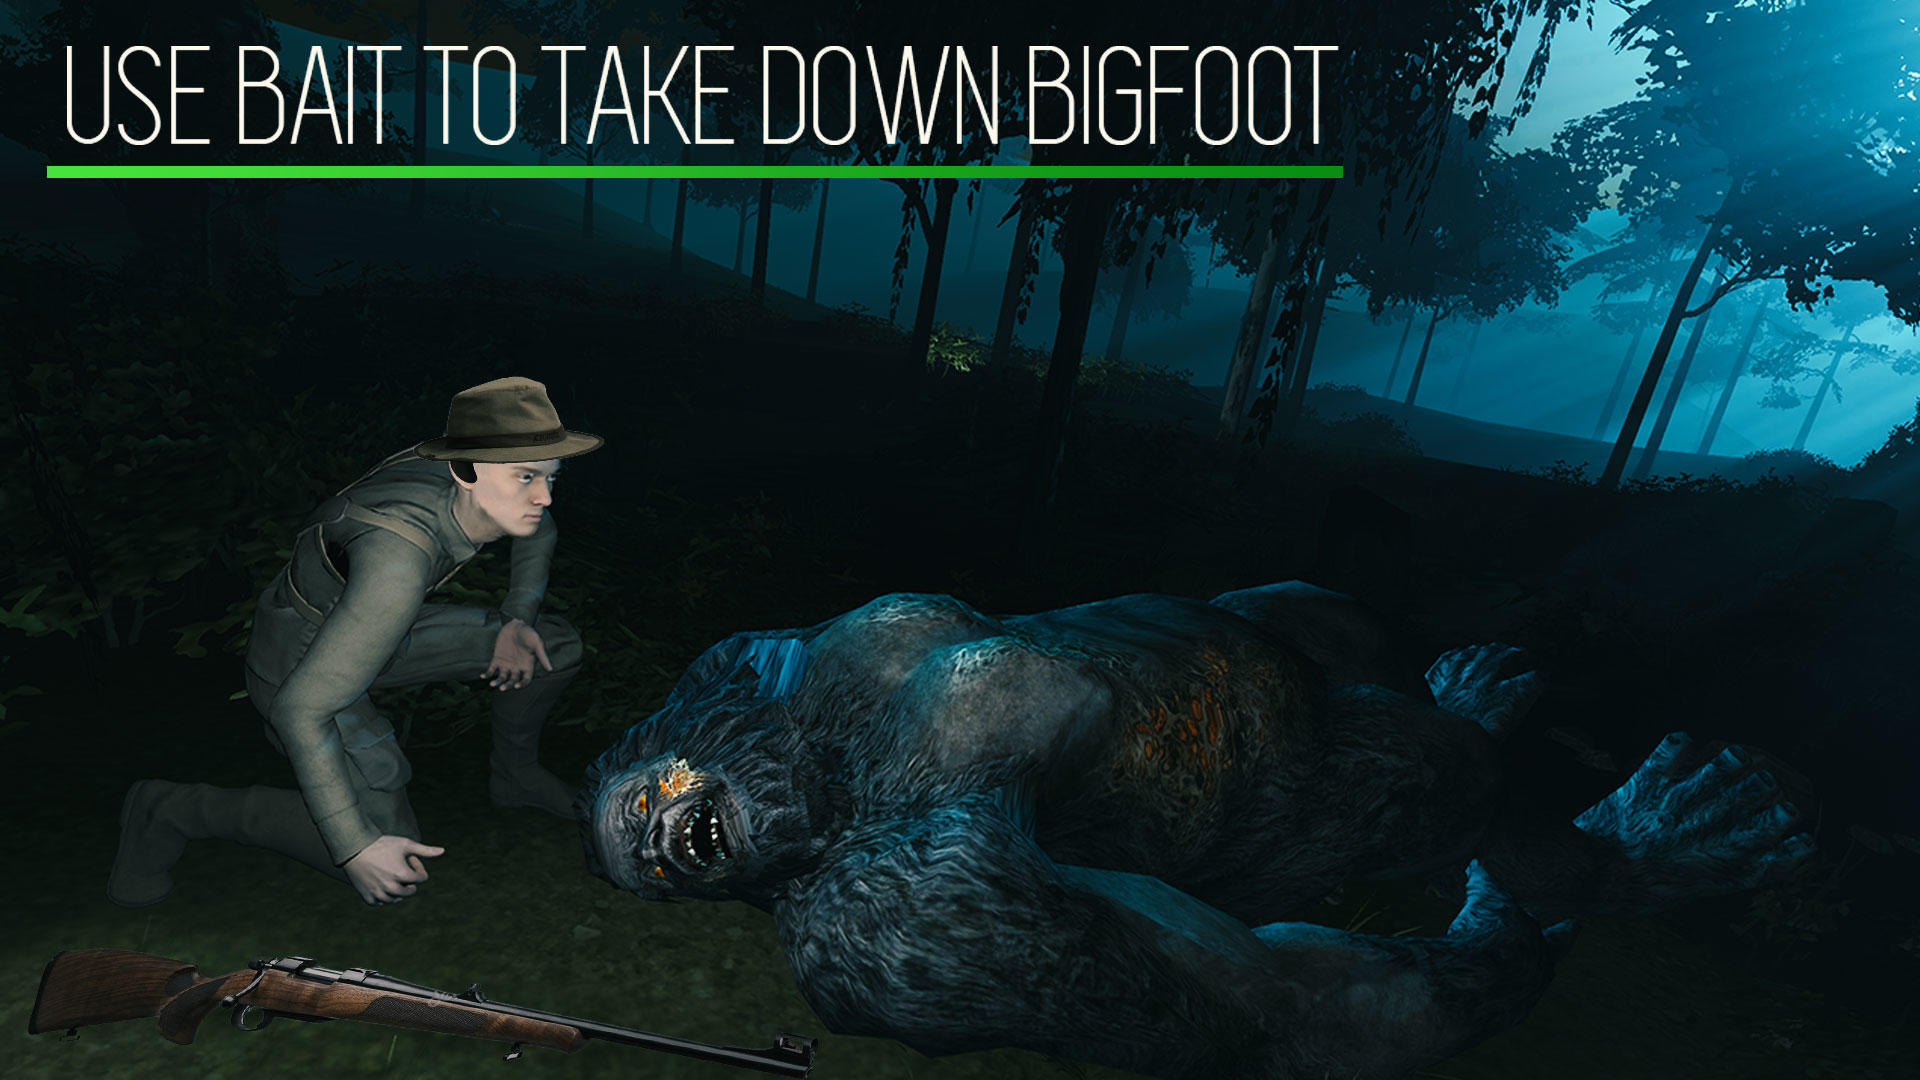 Bigfoot Monster Hunting Quest for Android - Free App Download